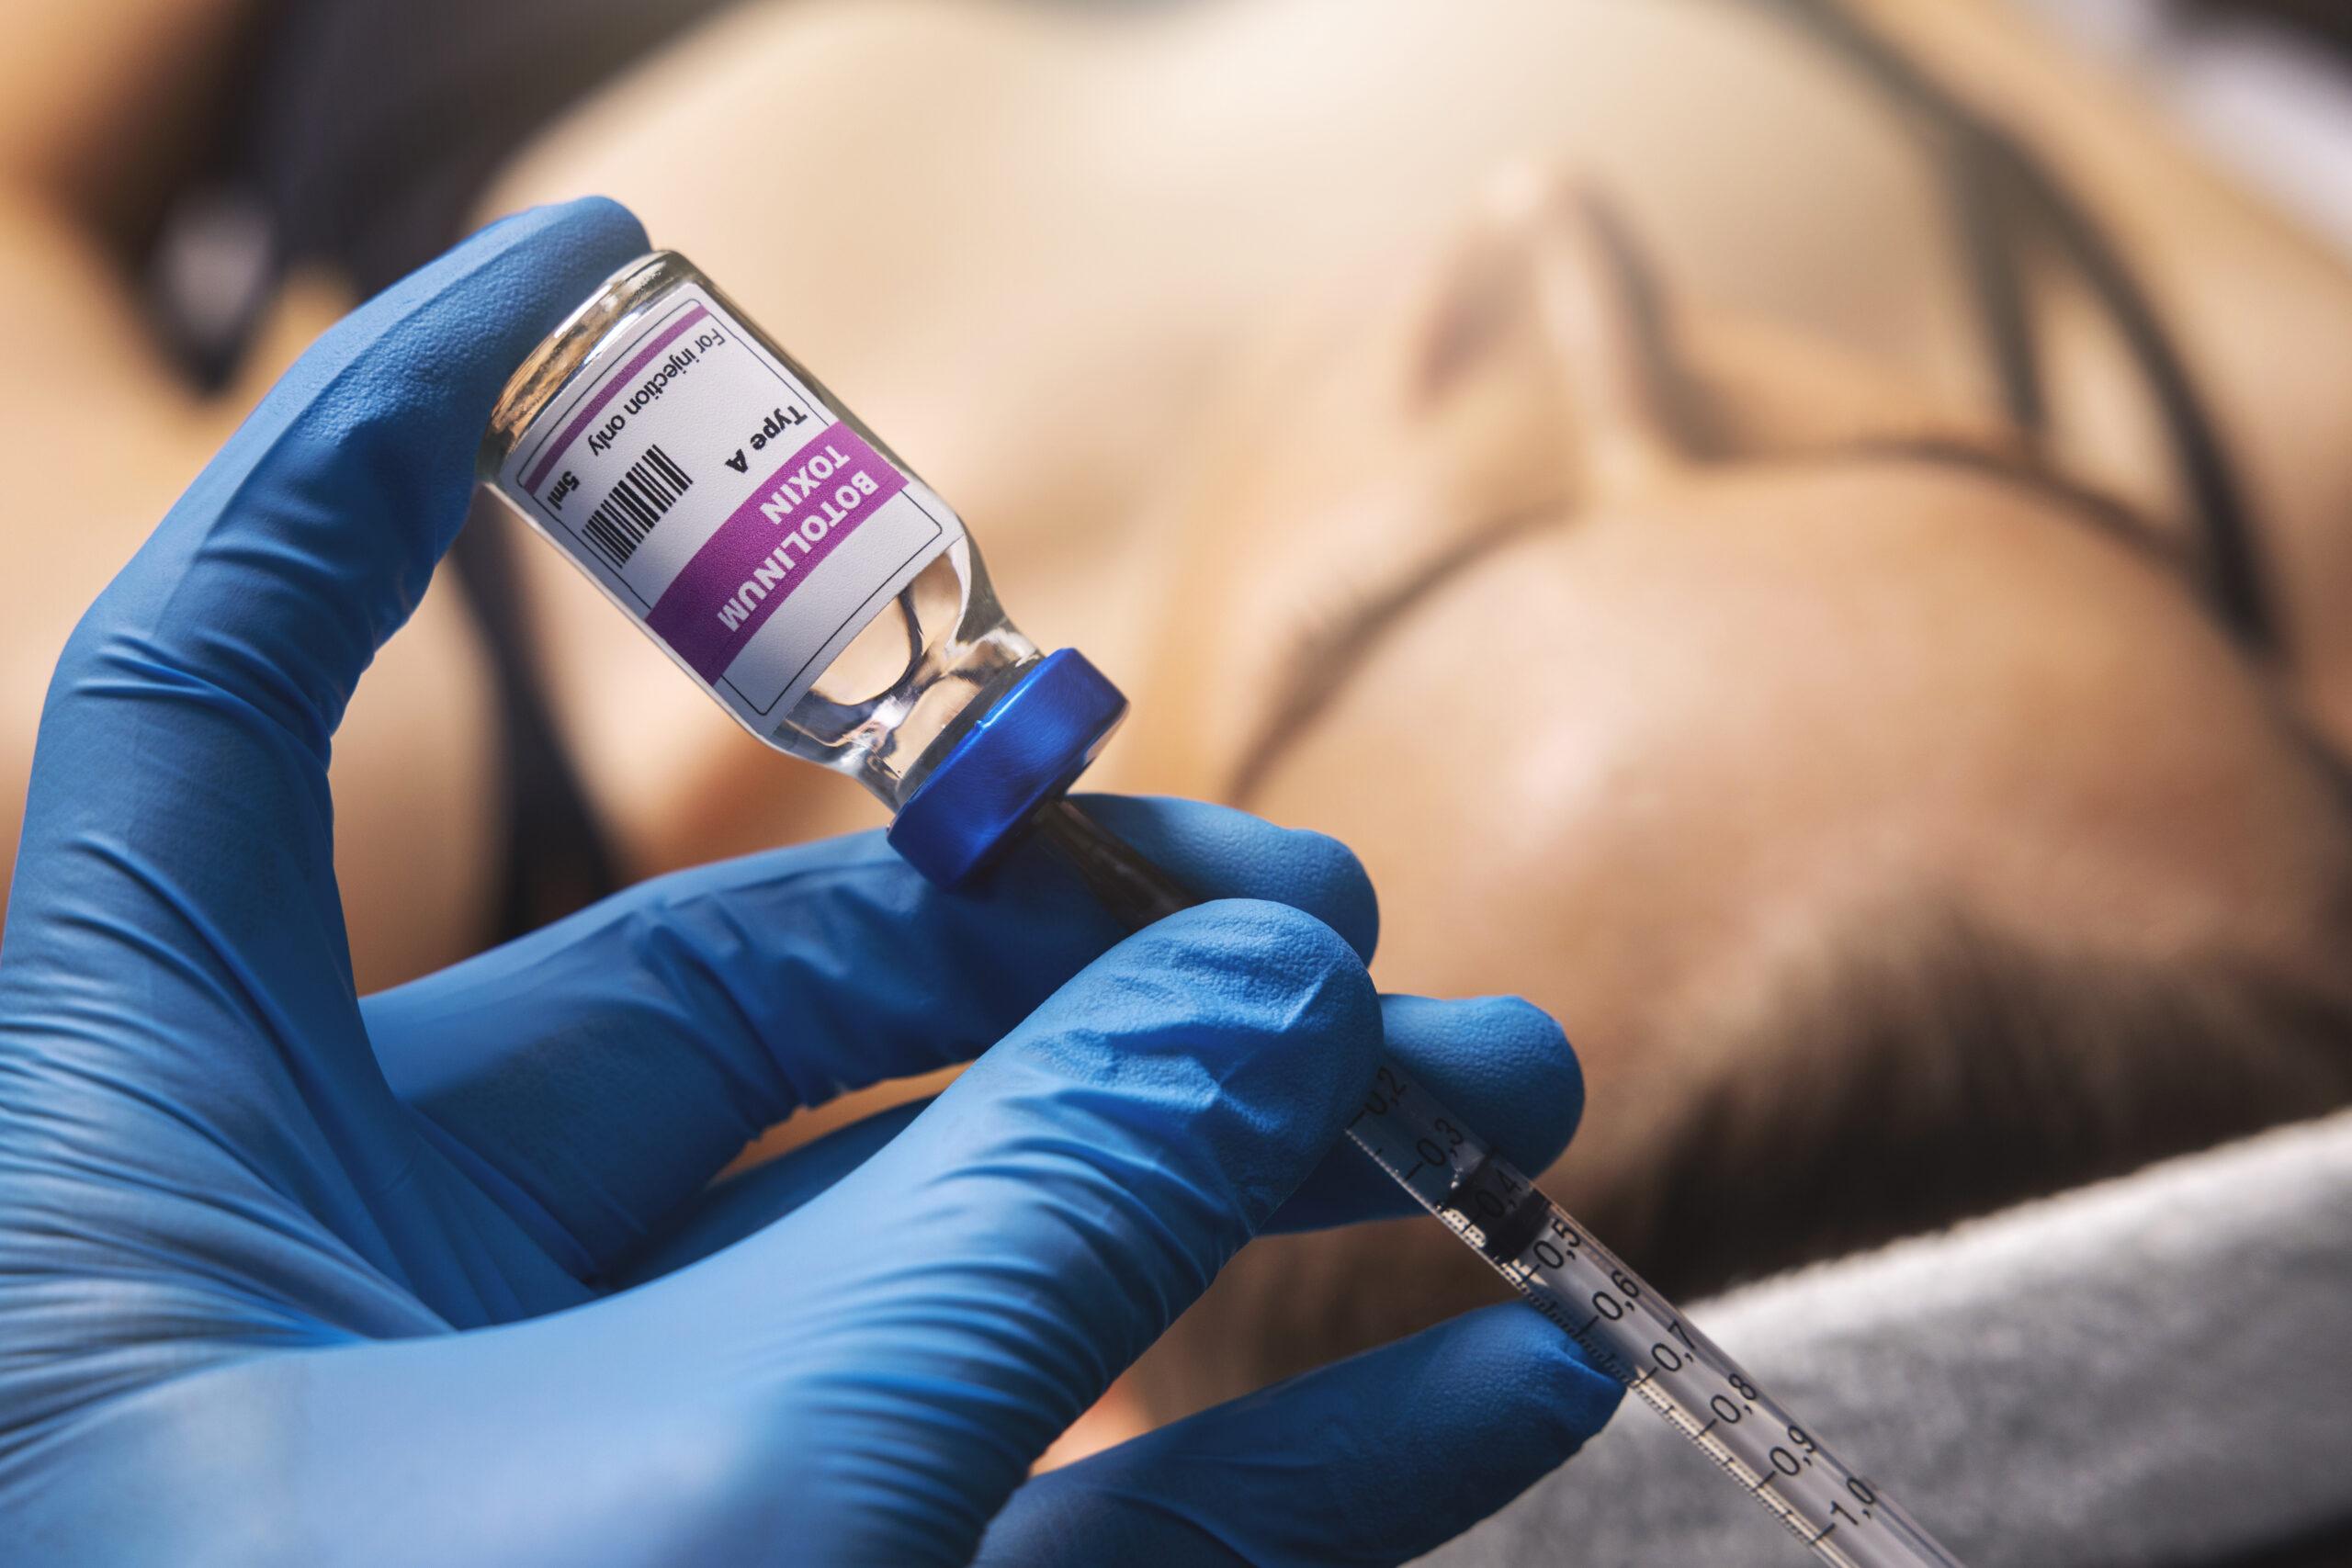 What to do after BOTOX treatment?